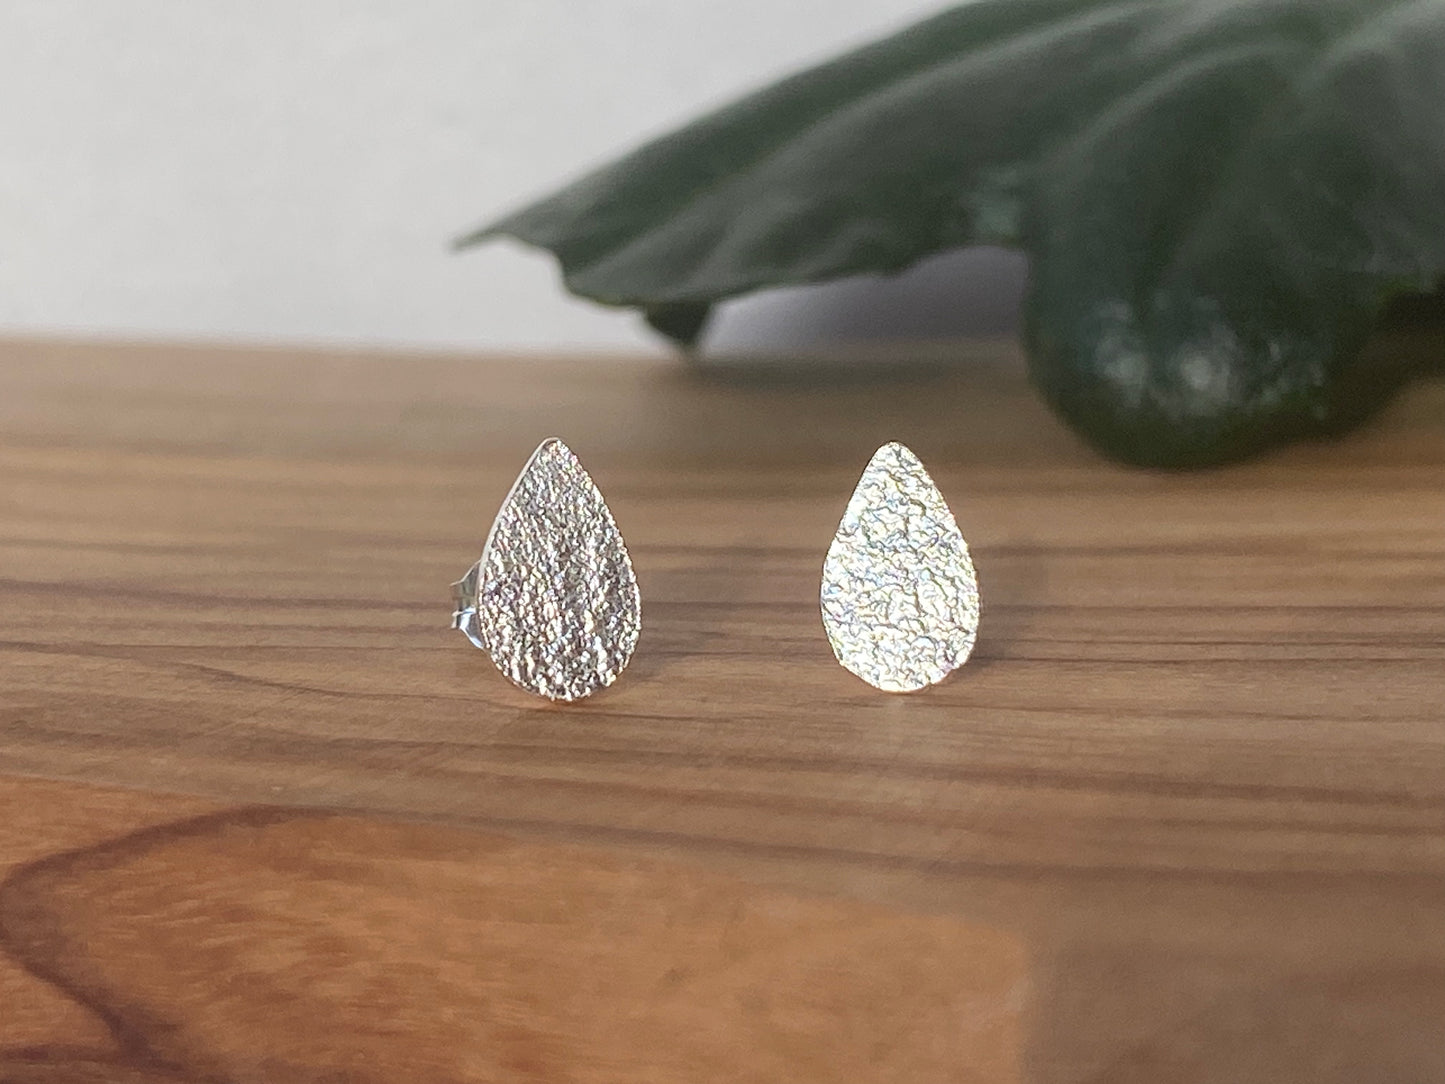 Reticulated silver drop studs